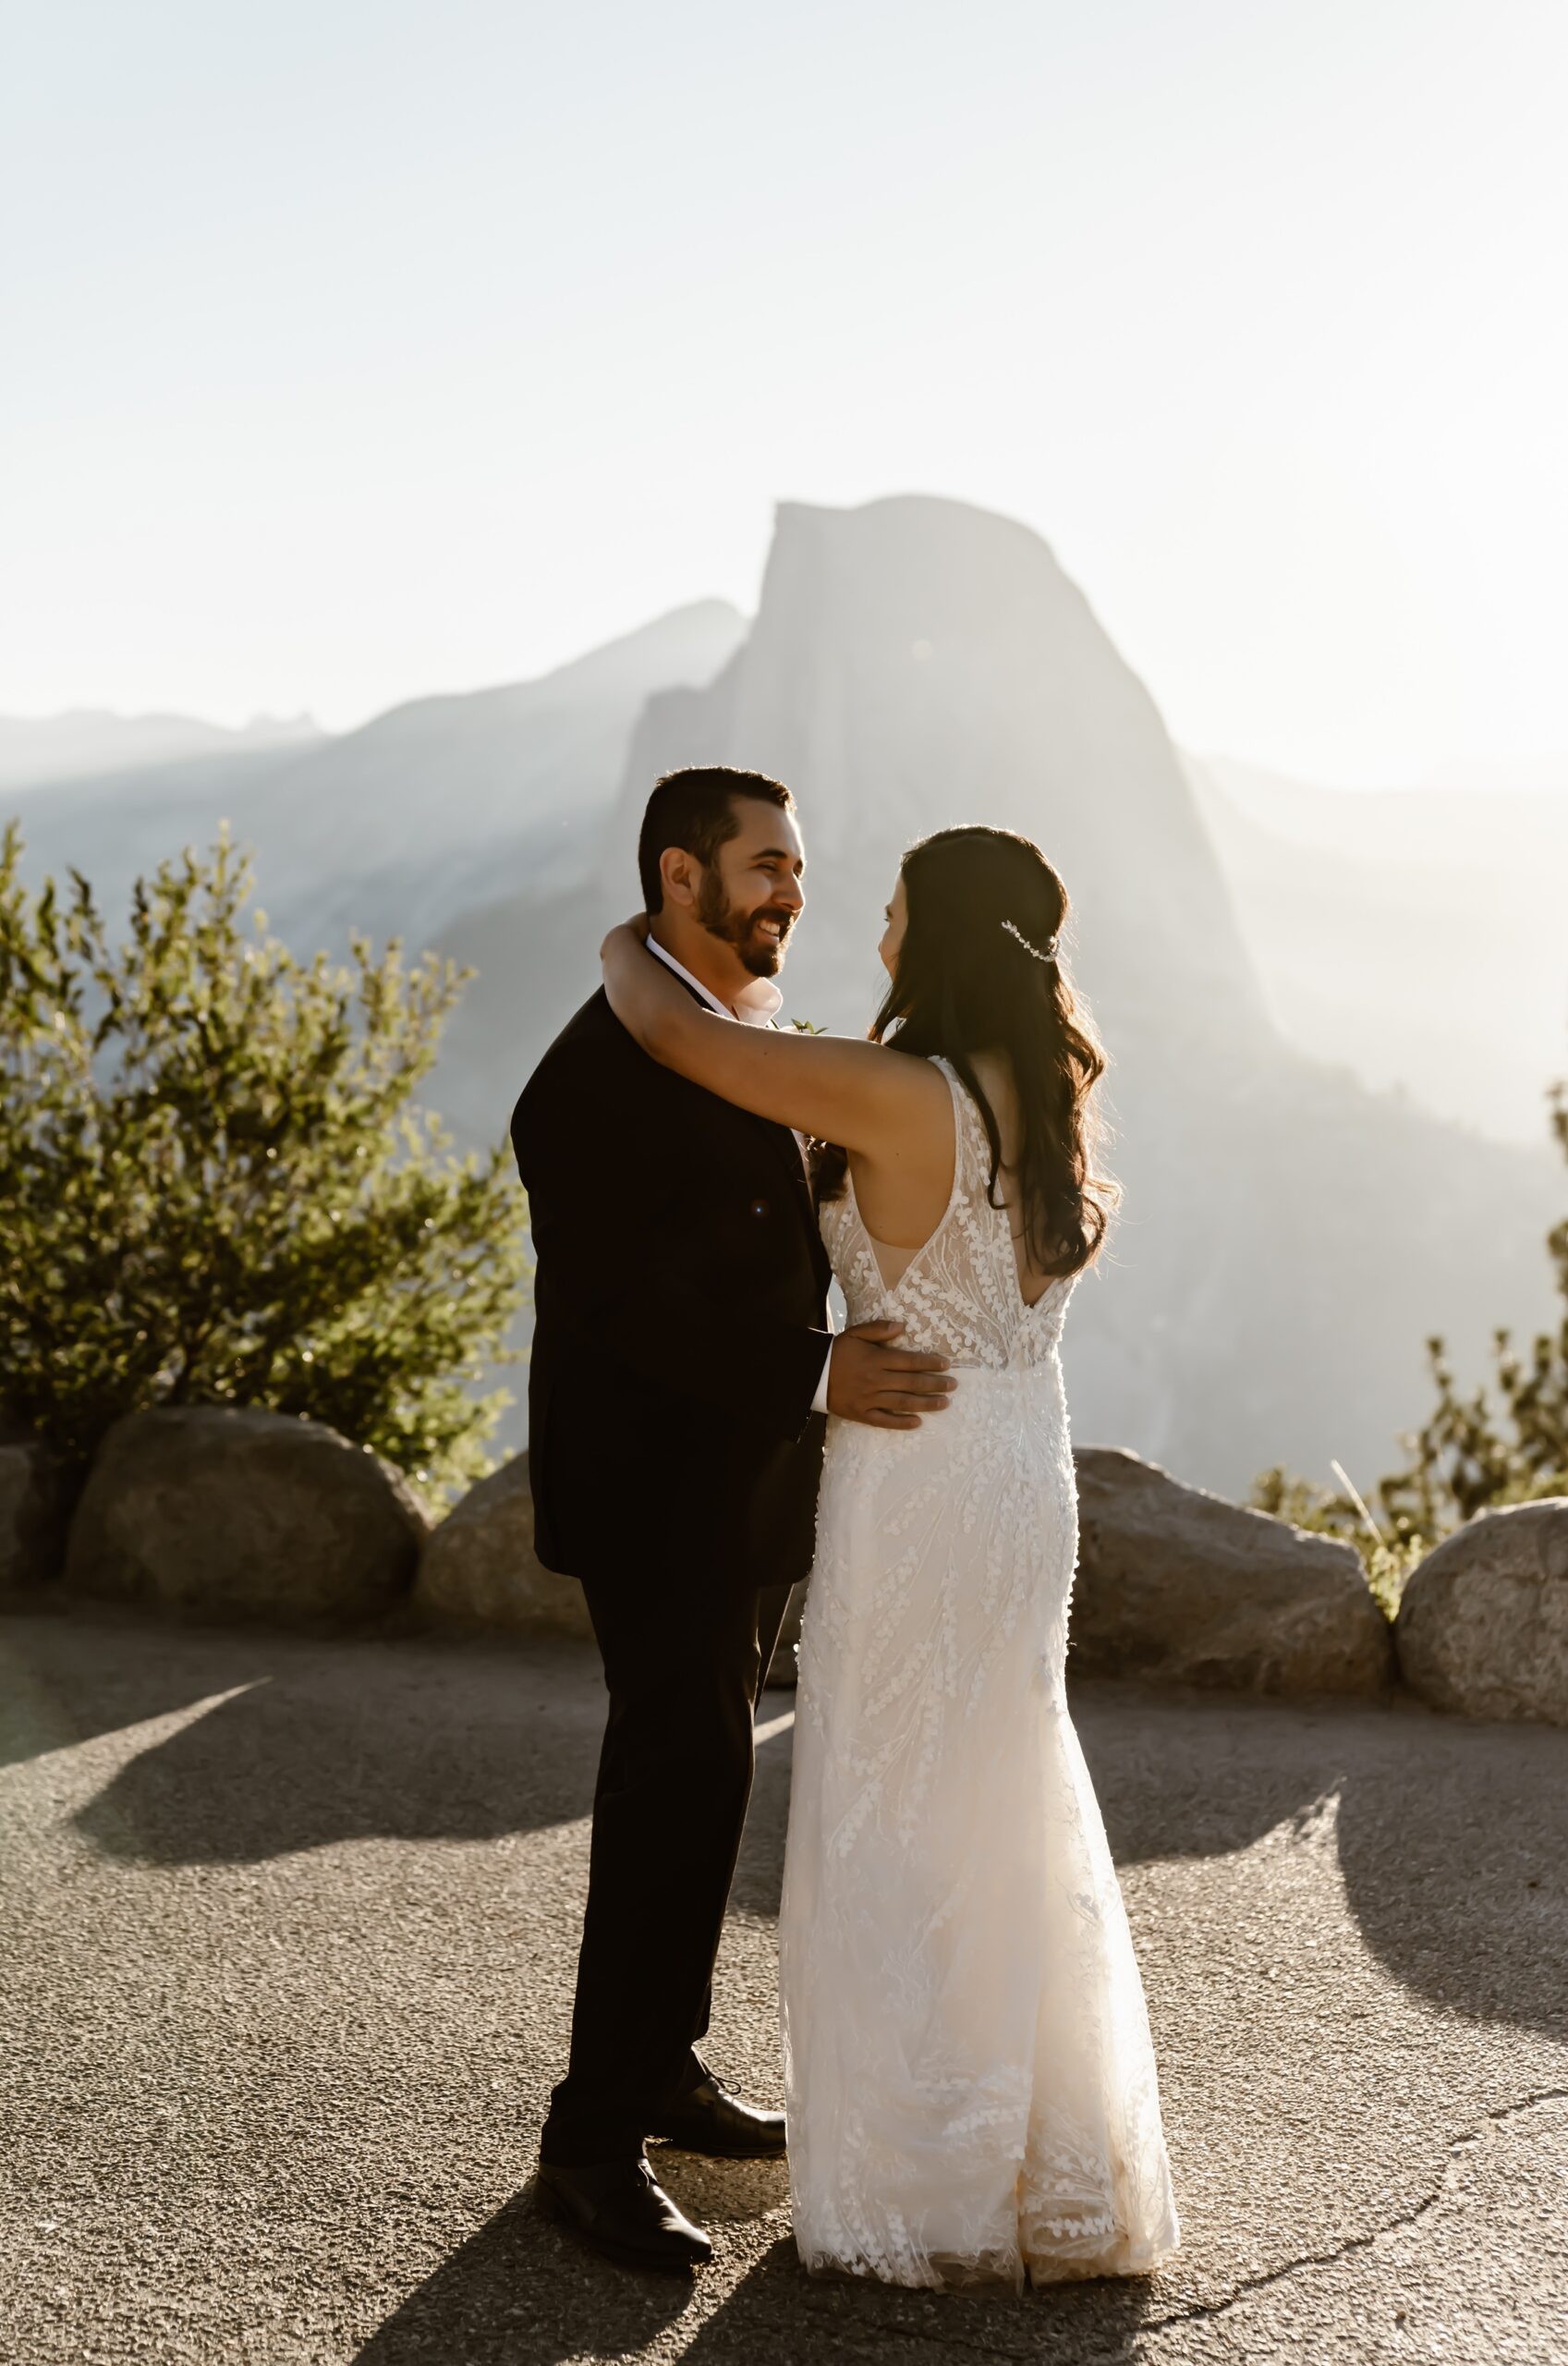 Bride and groom have first dance at Yosemite wedding